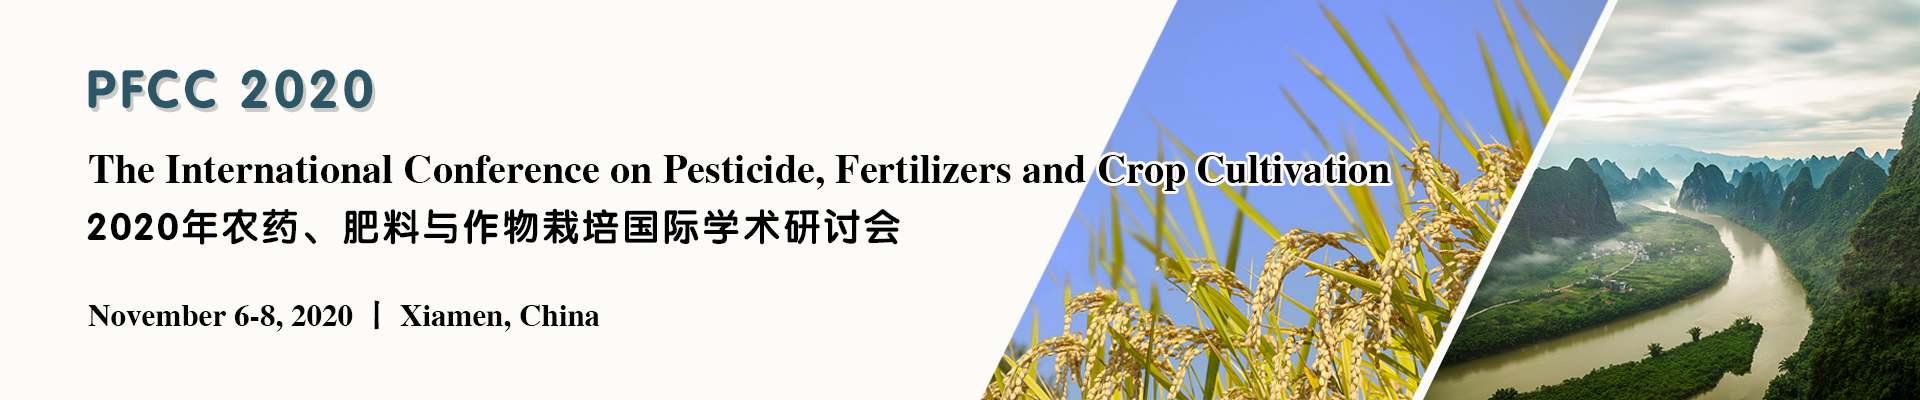 International Conference on Pesticide, Fertilizers and Crop Cultivation (PFCC 2020), Xiamen, Fujian, China